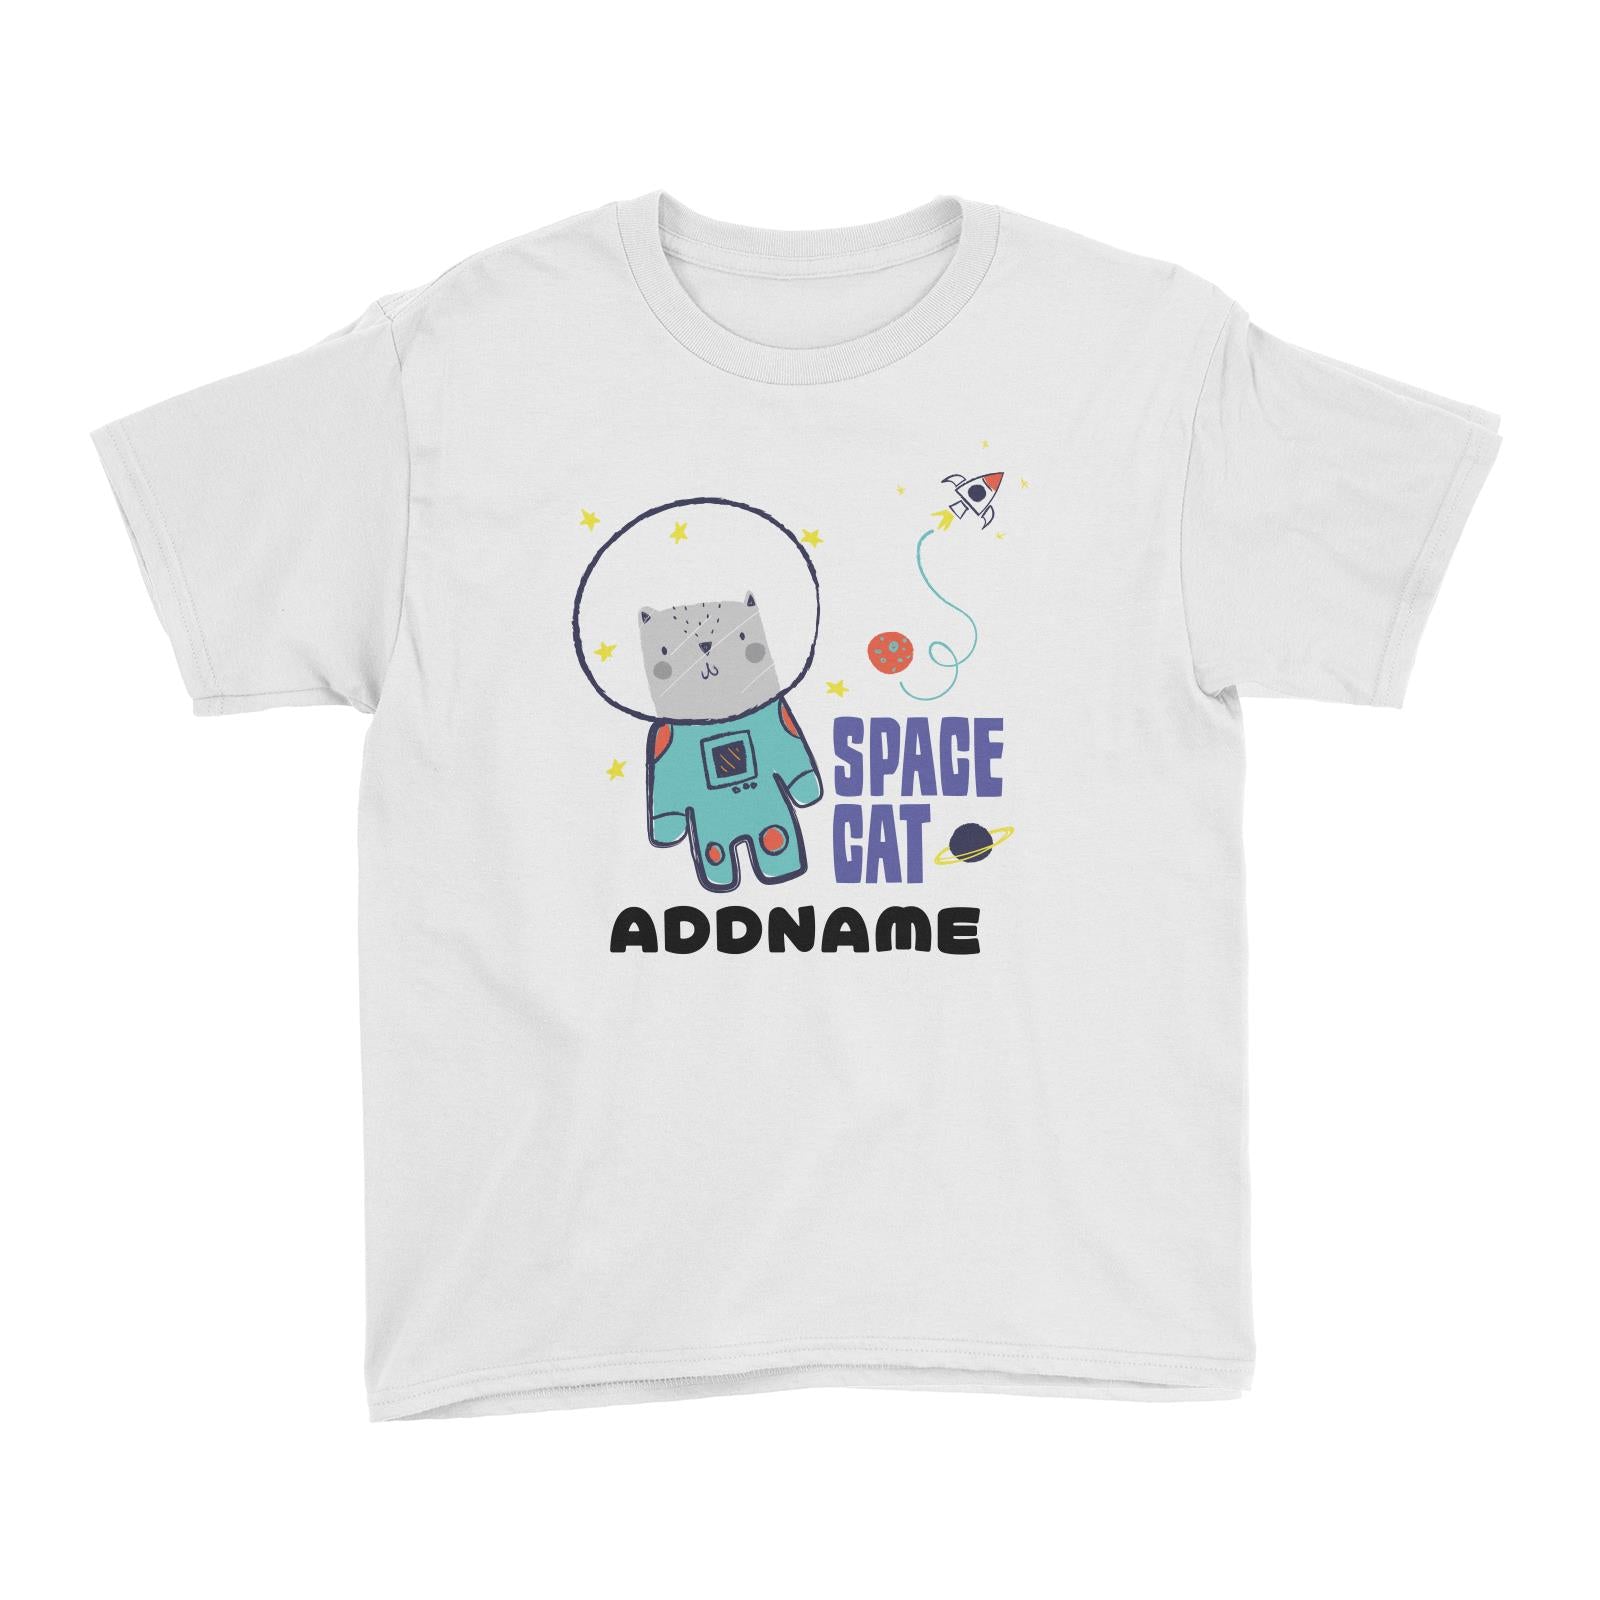 Space Cat Addname White Kid's T-Shirt